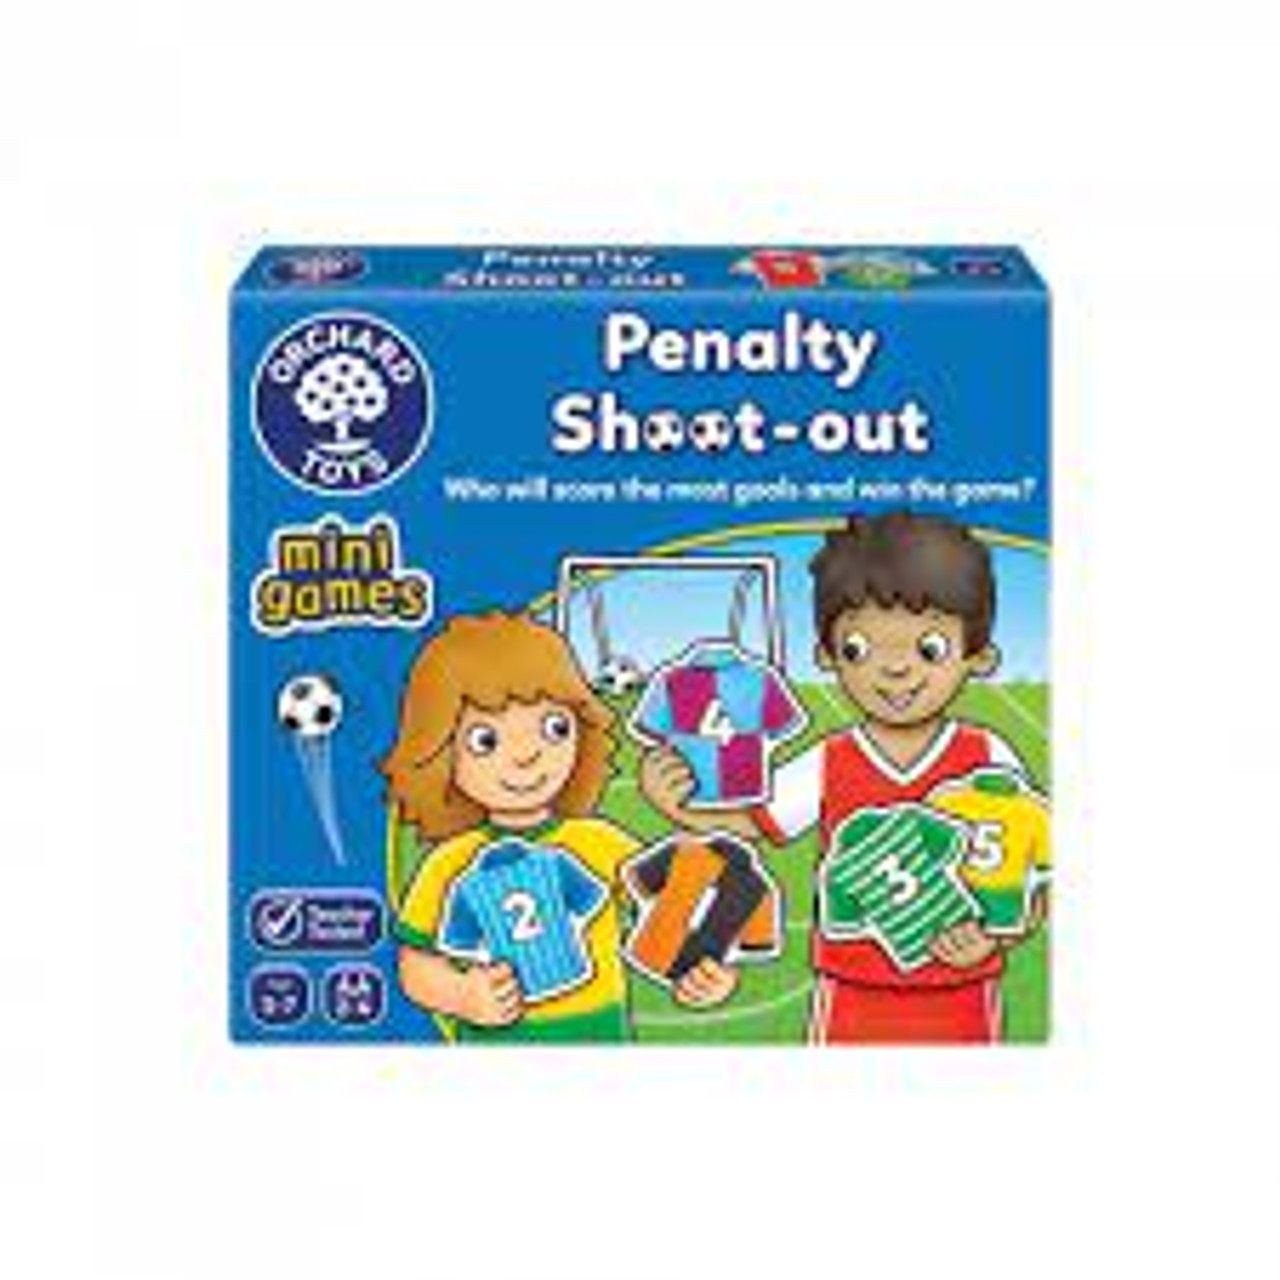 PENALTY SHOOT-OUT MINI GAME